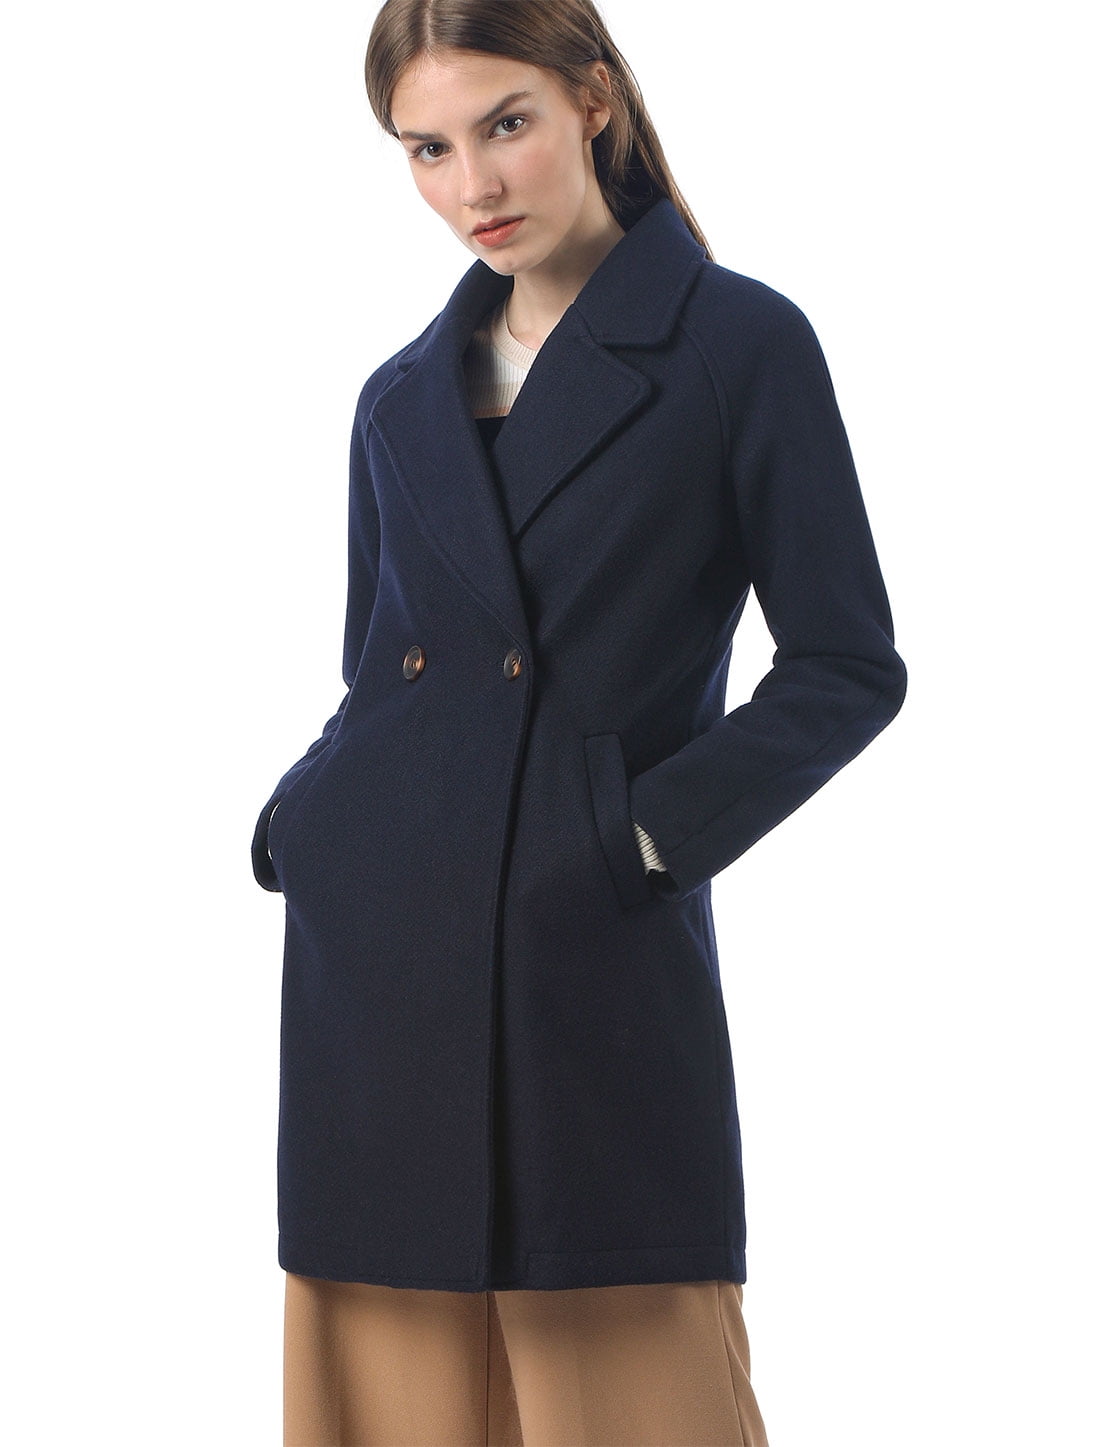 Women's Notched Lapel Double Breasted Raglan Trench Coat Blue XL (US 18